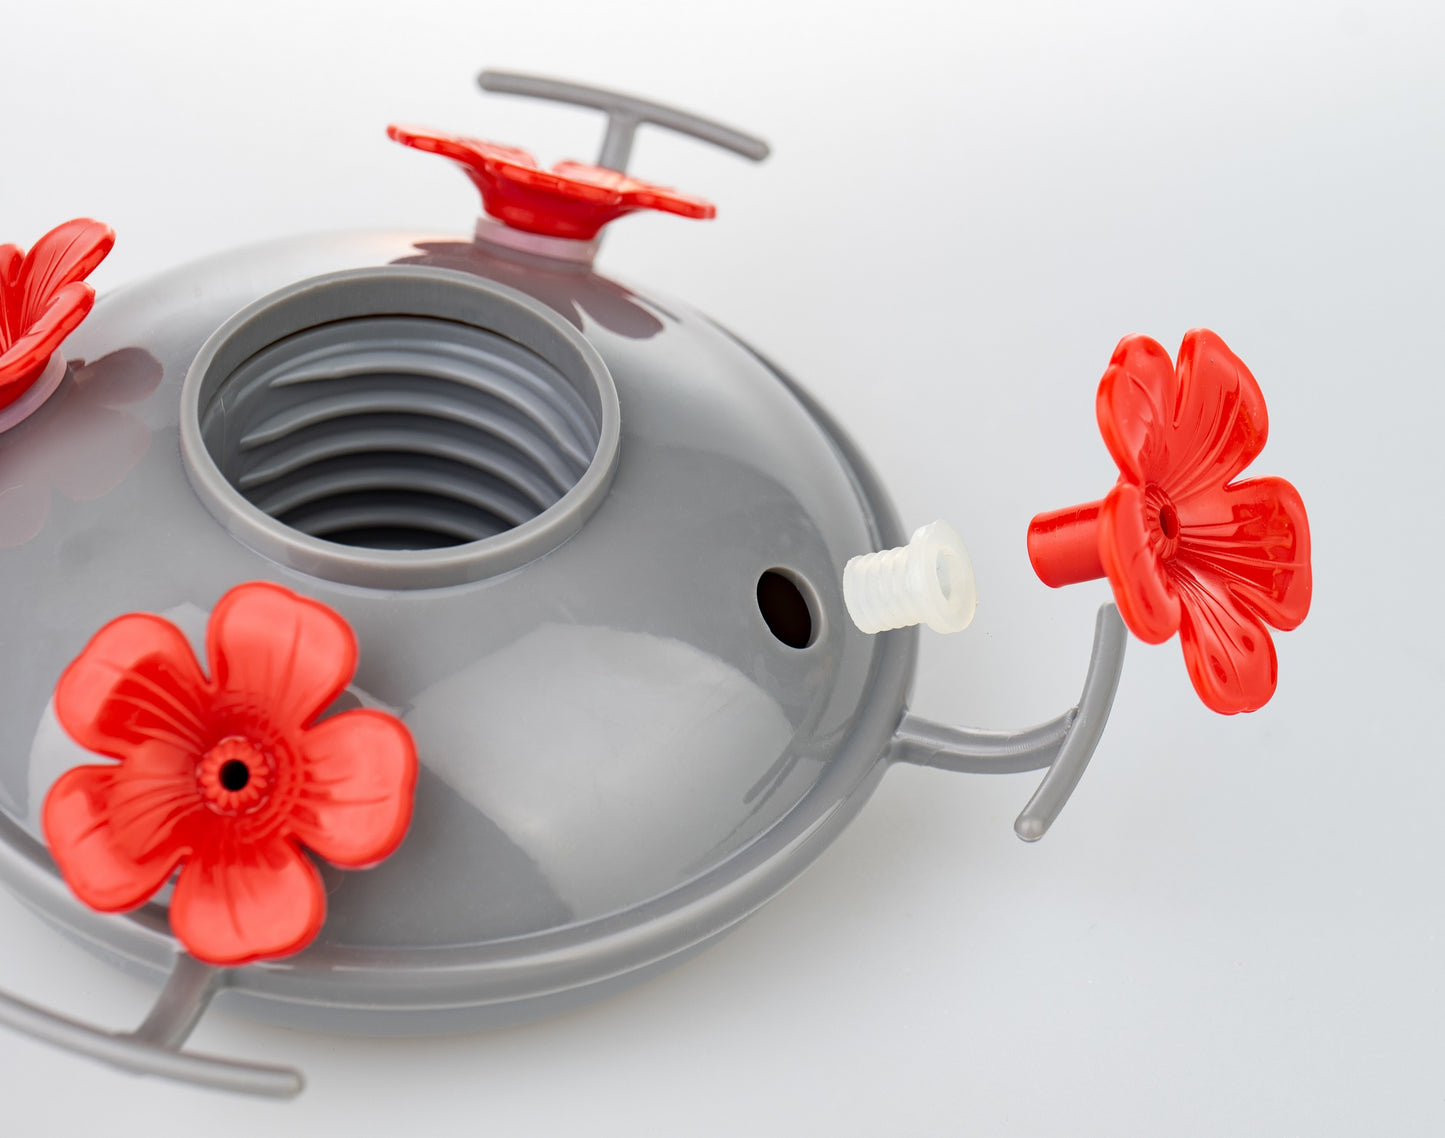 Muse Garden Hummingbird Feeder Original Replacement Part Base, Containing Extra 4 Removable Replacement Red Flowers